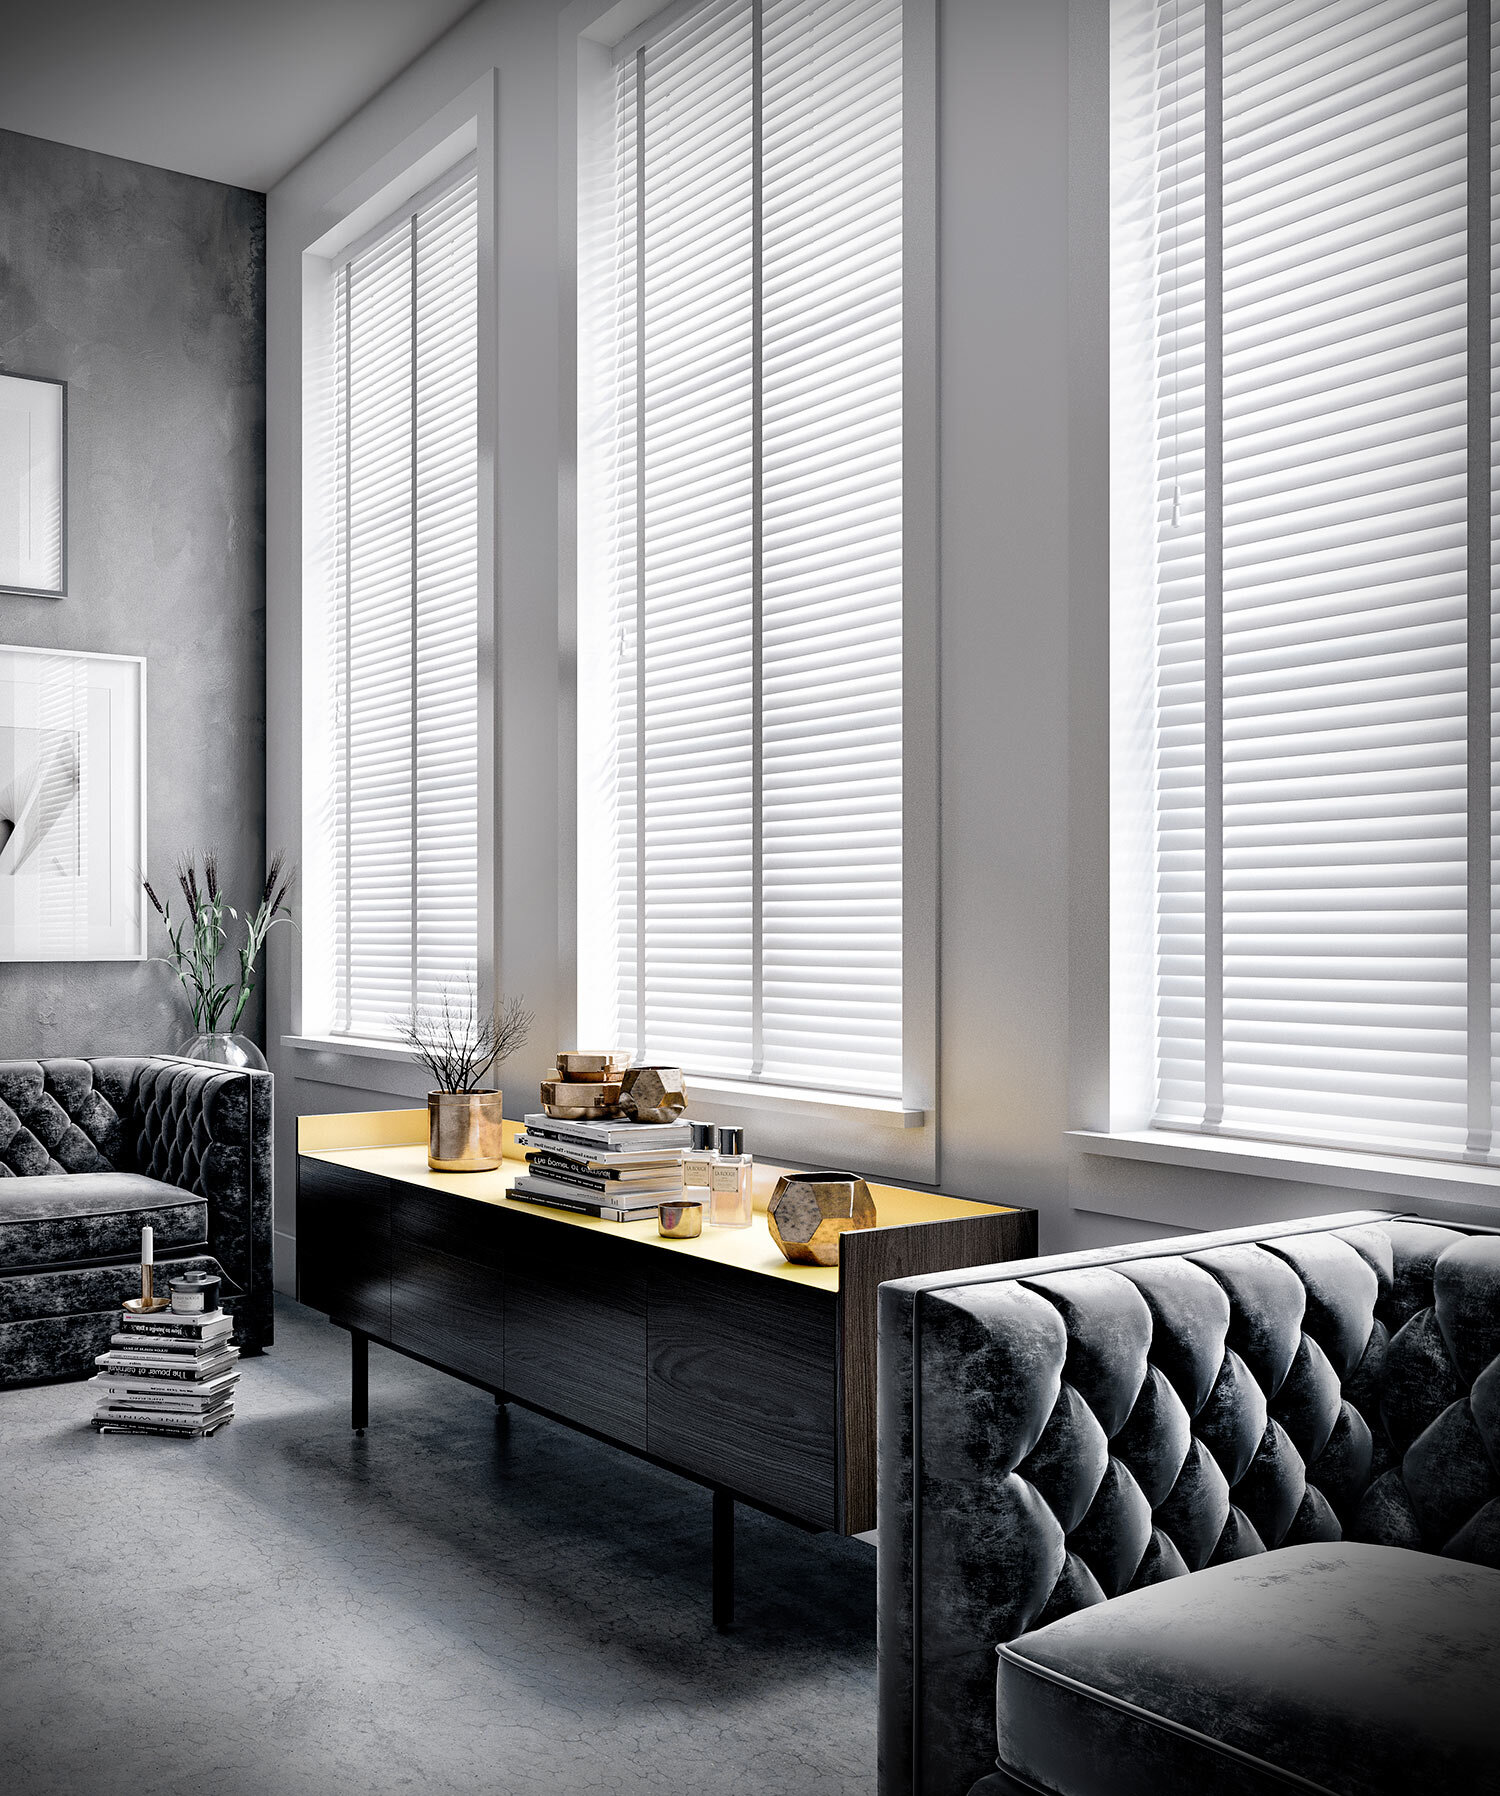 Motorised Window Blinds Surrey. Remote, voice or app controlled these electric window blinds are modern window coverings than can either be mains or battery powered as a retro fit solution. 